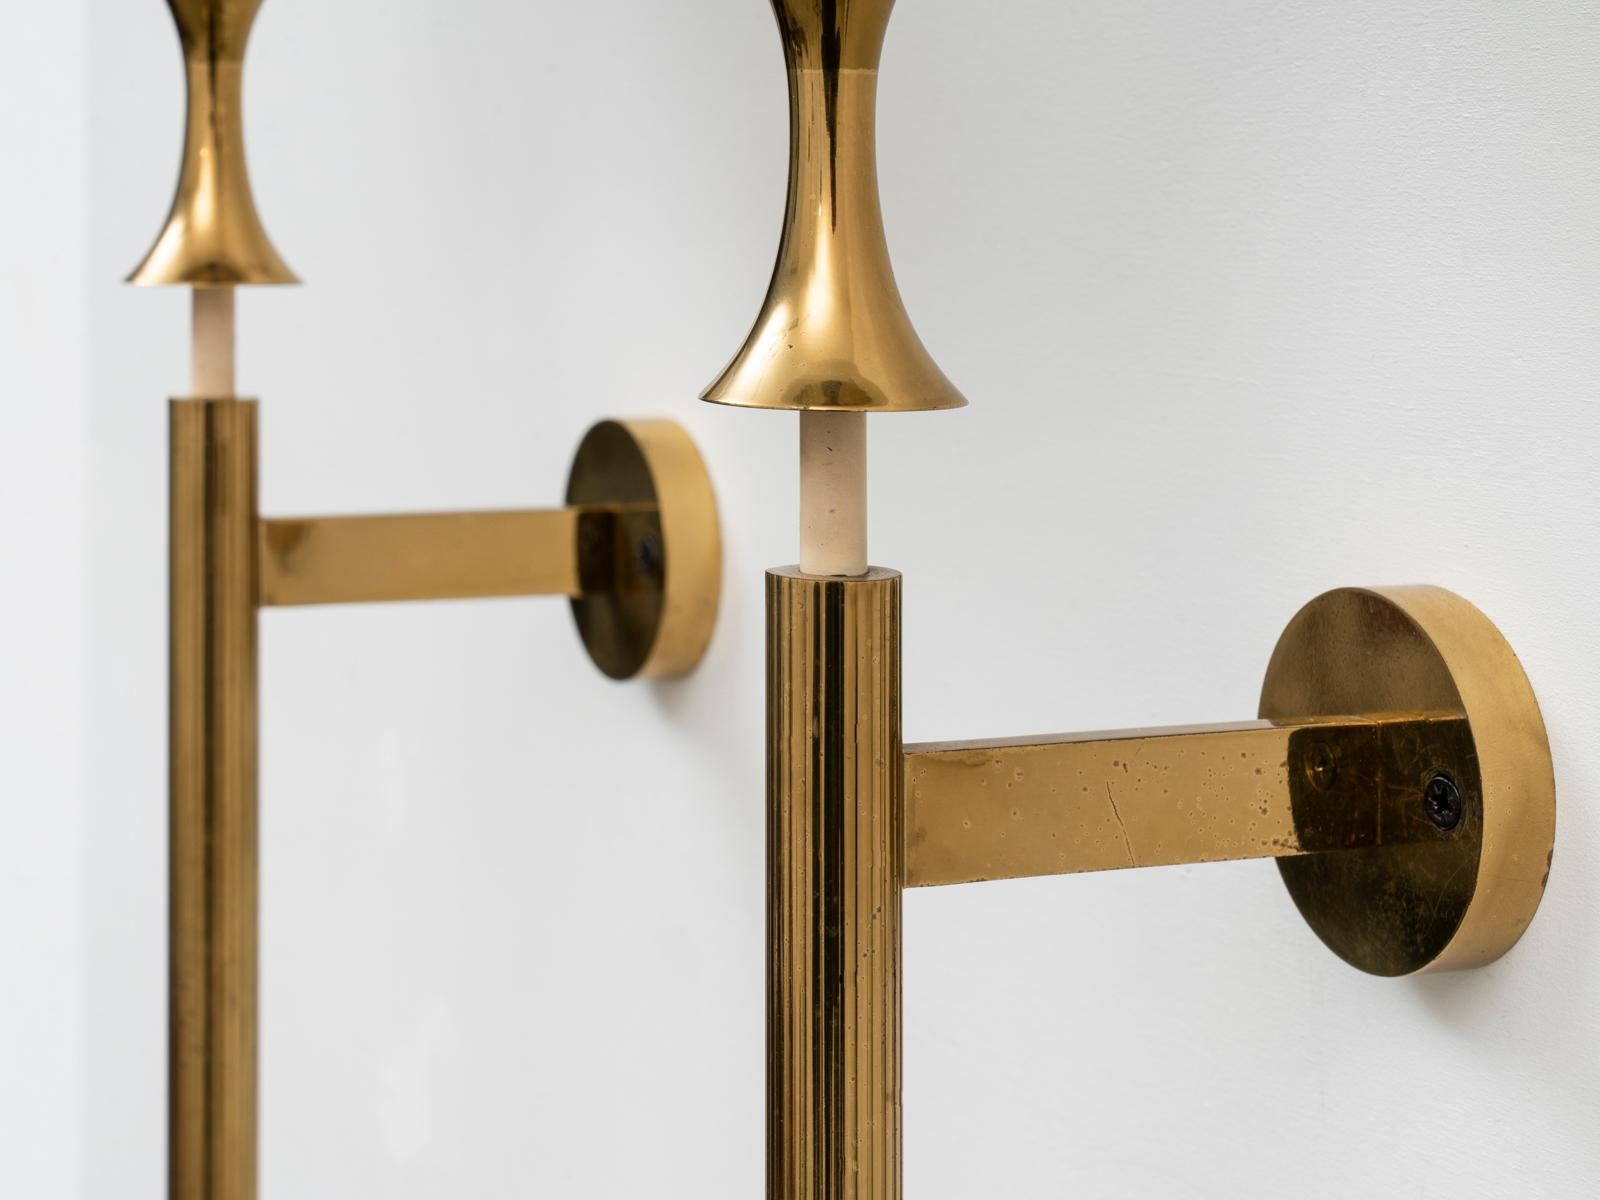 Angelo Lelii Pair of Large Brass Opaline Midcentury Sconces for Arredoluce 1956 In Good Condition For Sale In Milan, Italy